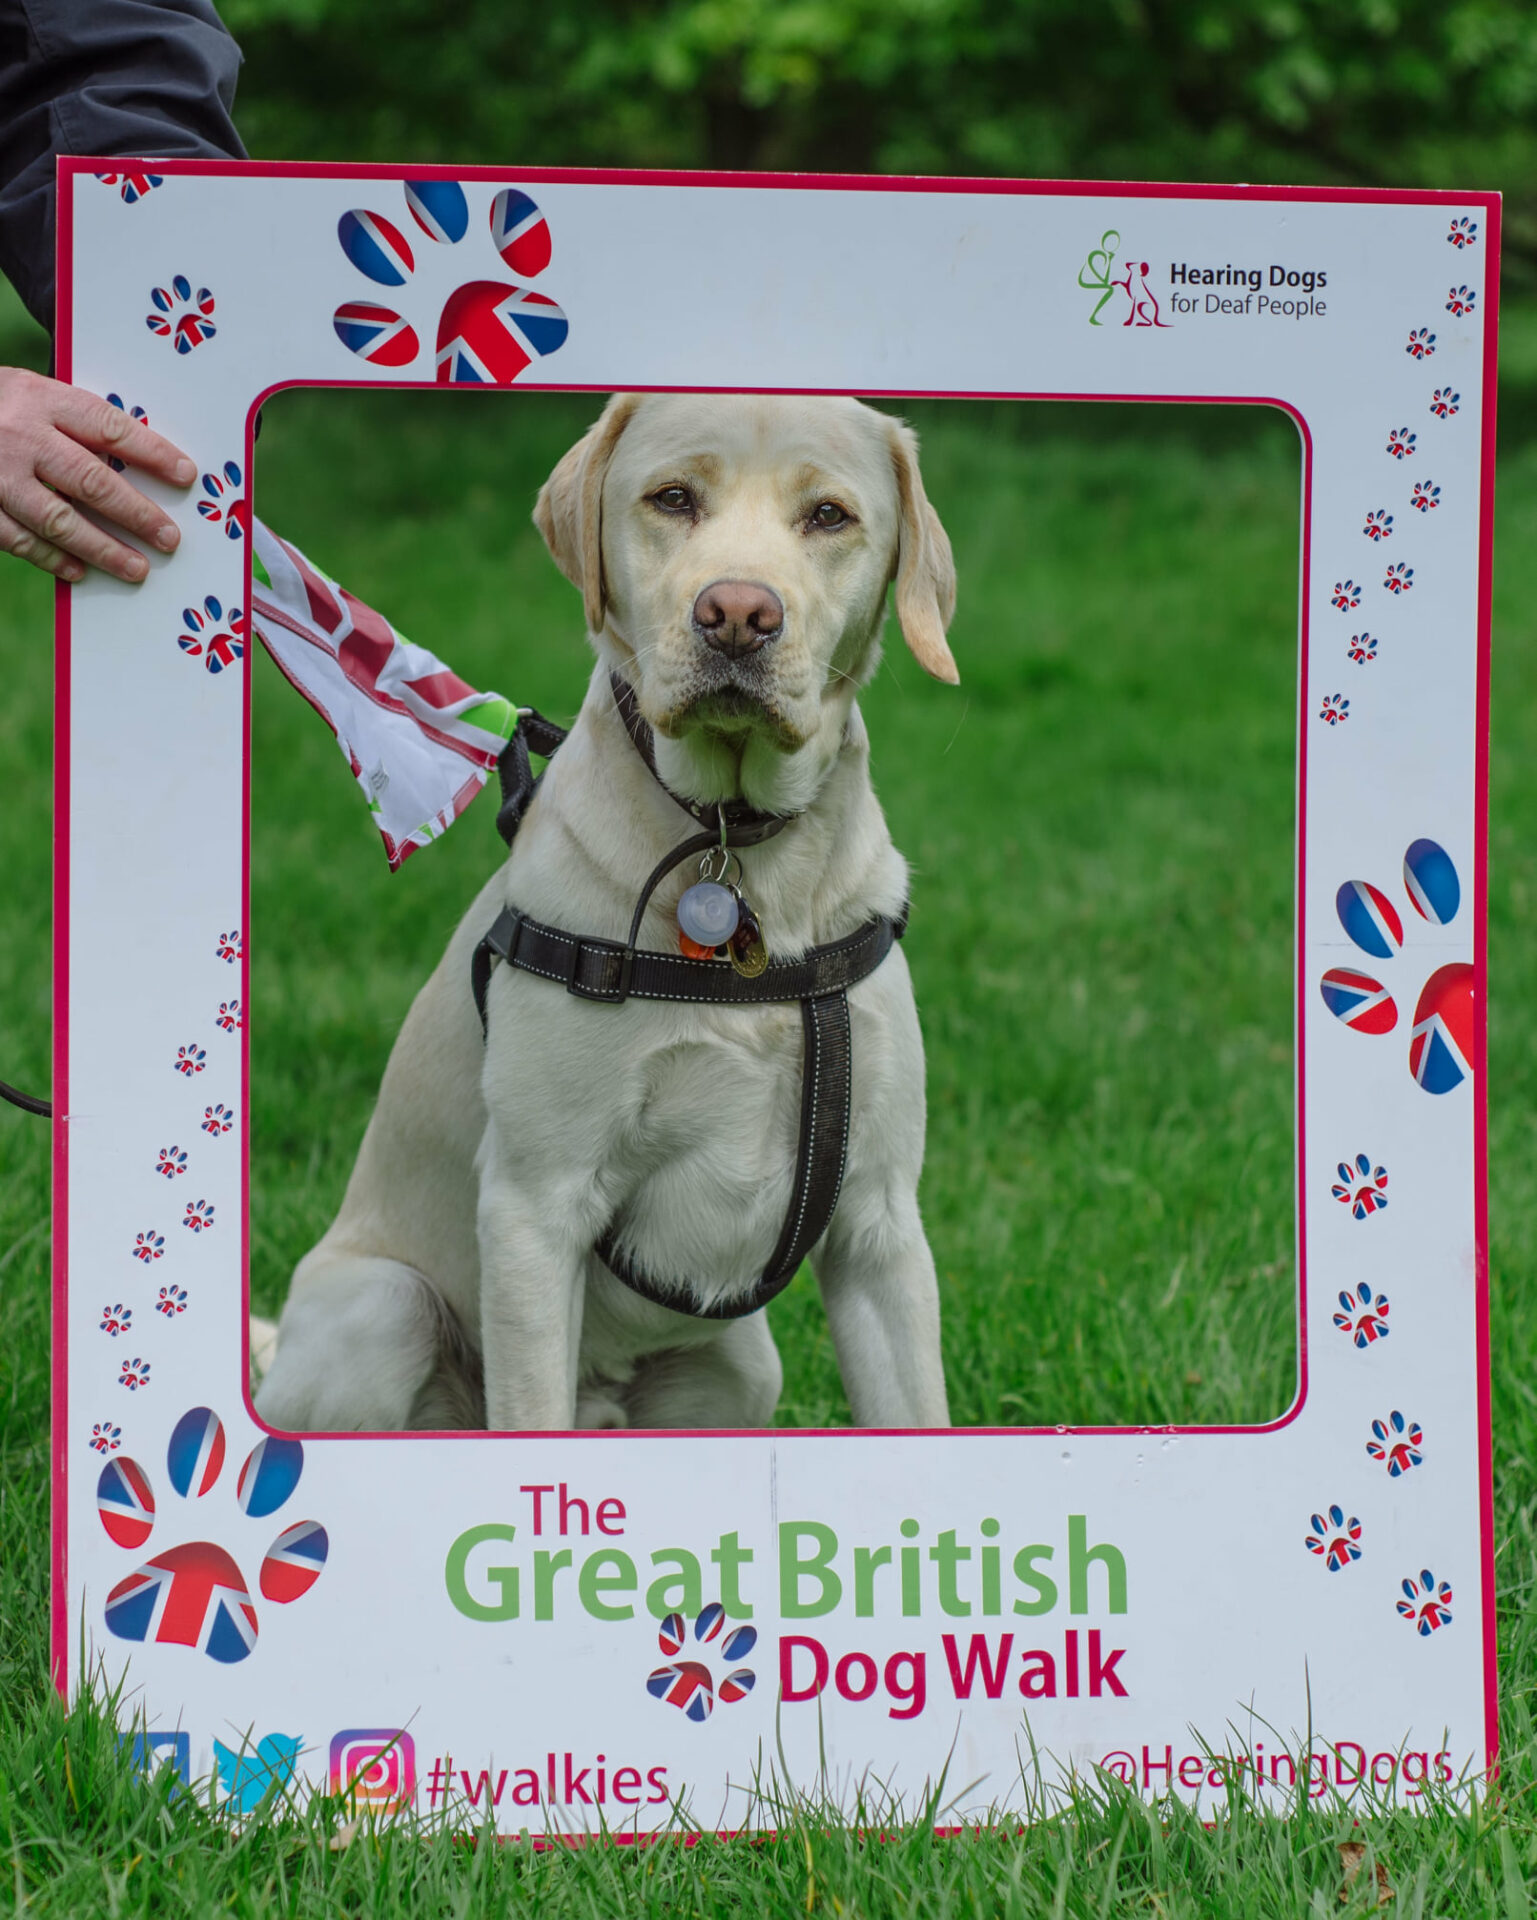 Sponsored walk for Hearing Dogs for Deaf People – Lyme Park, Cheshire – The Great British Dog Walk